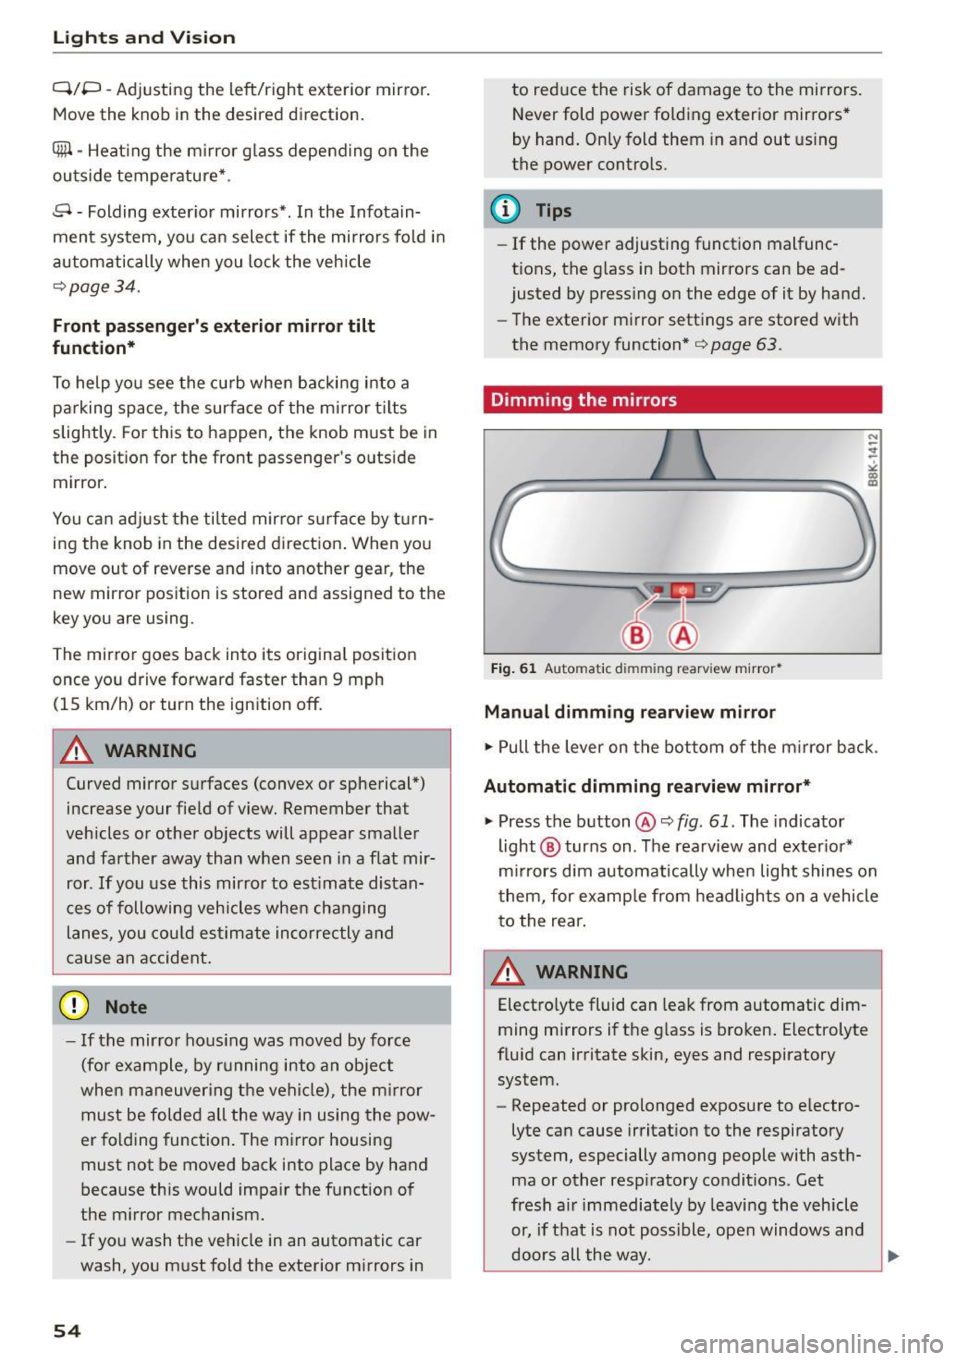 AUDI A5 CABRIOLET 2015 Workshop Manual Lights and  Vision 
Q/P  -Adjusting  the  left/right  exterior  mirror . 
Move the  knob  in the  des ired direction. 
4ill  -Heat ing the  m irror  g lass depending  on the 
outside  temperature*. 
.